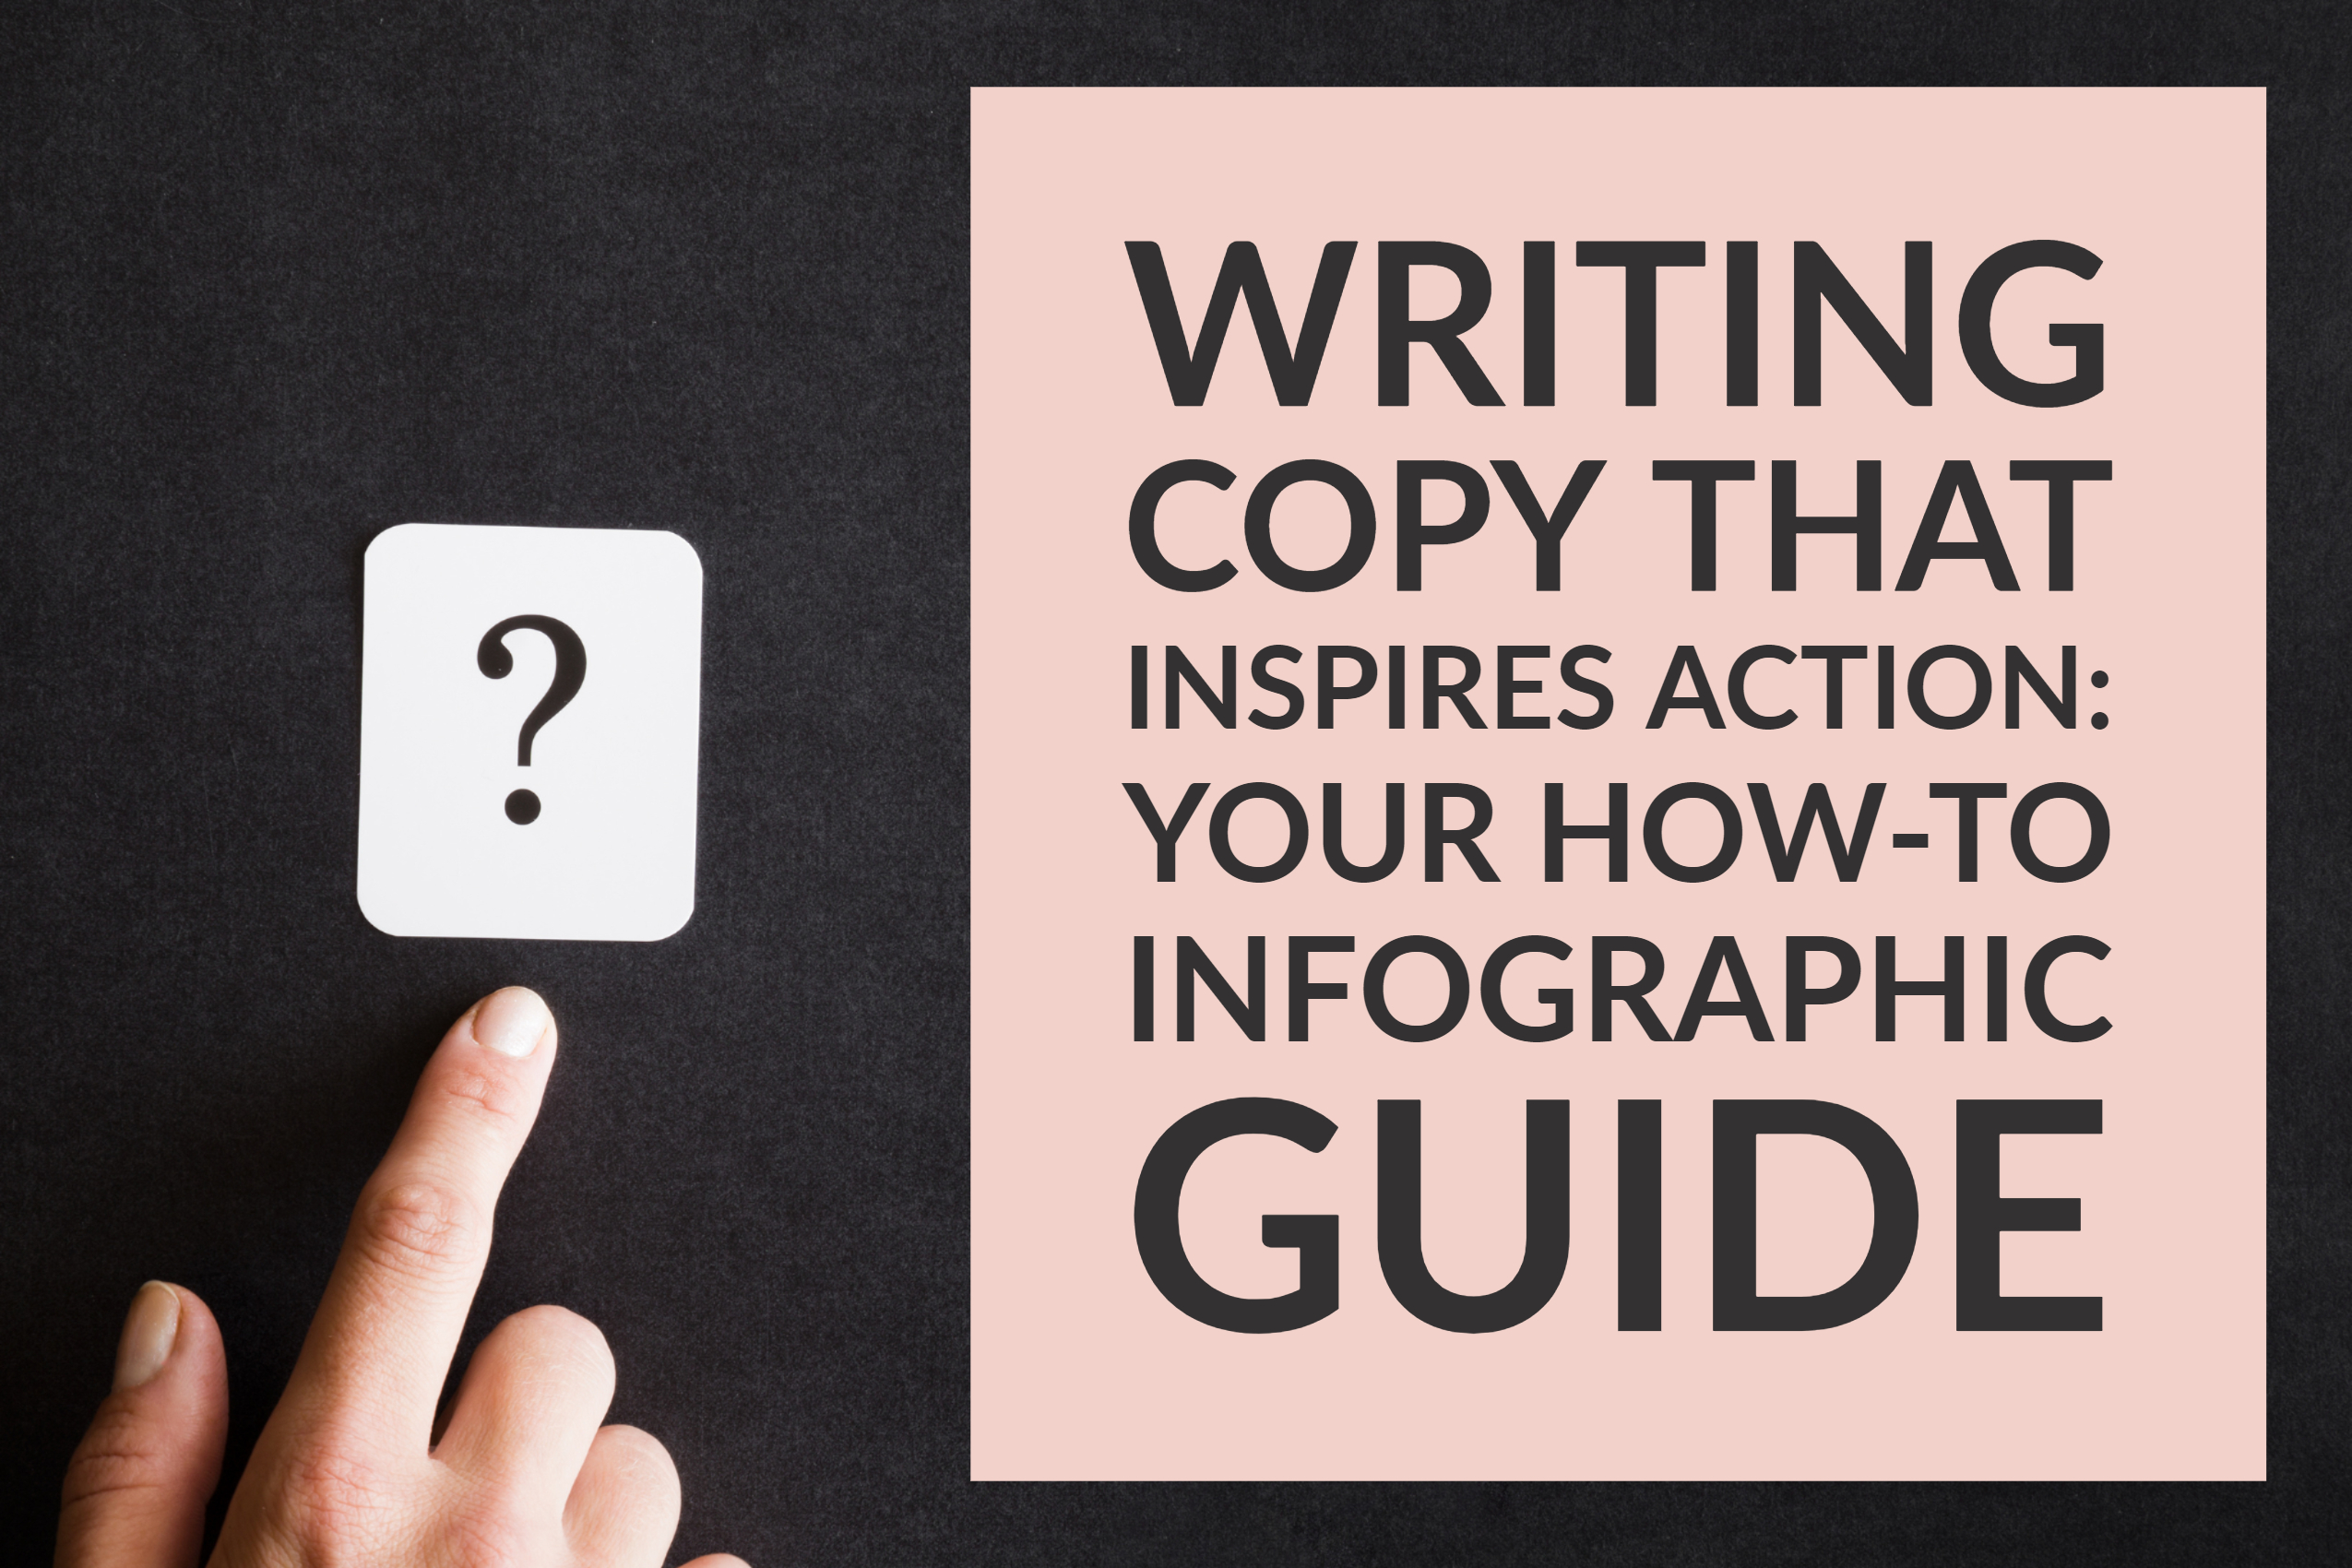 Writing Copy That Inspires Action: Your How-To Infographic Guide